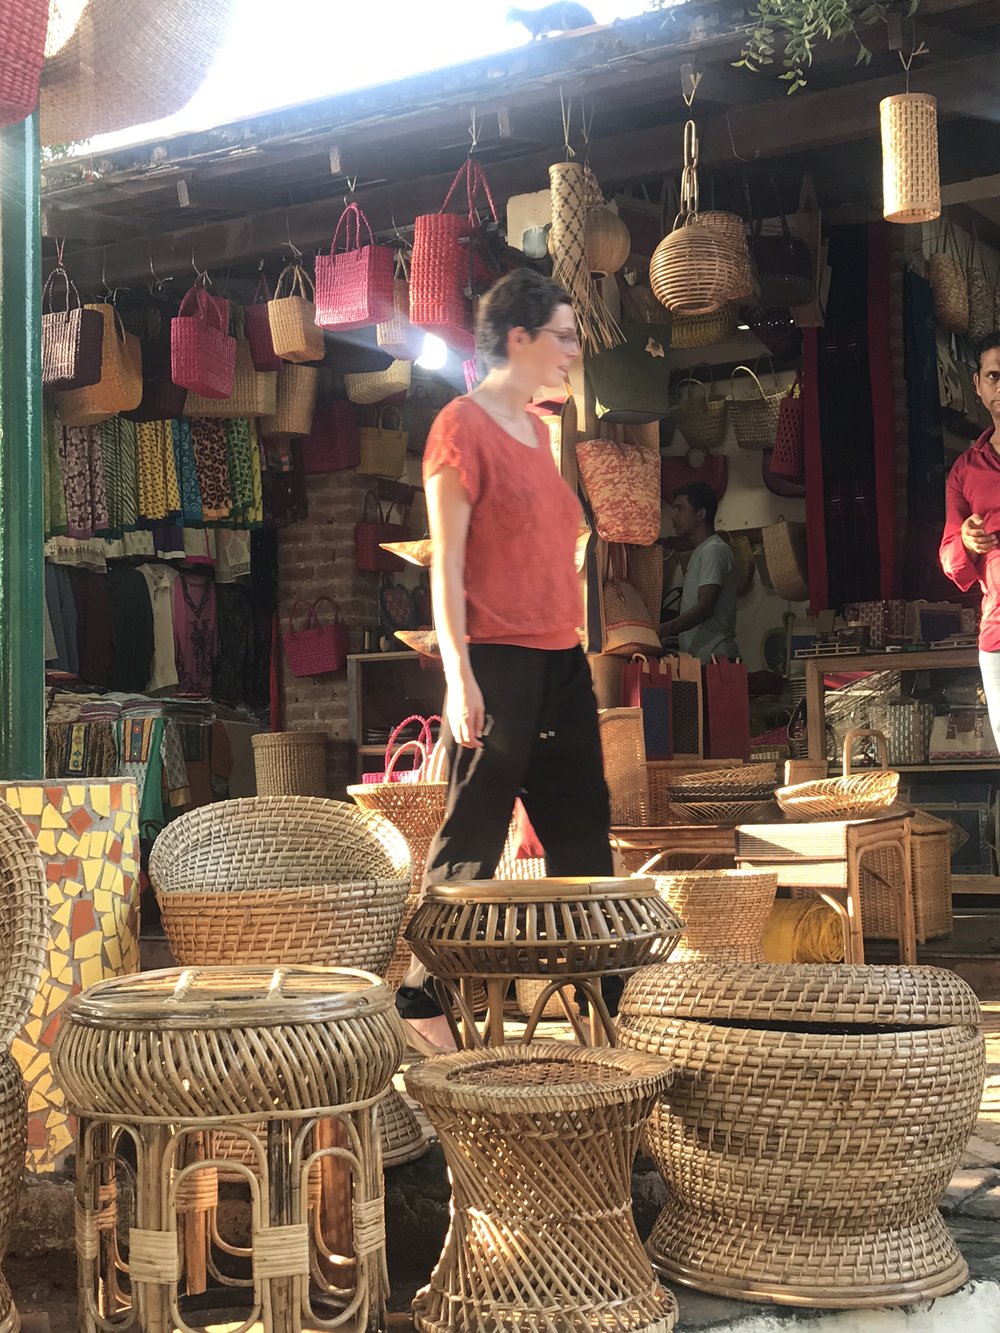 Baskets at the Dilli Haat Market